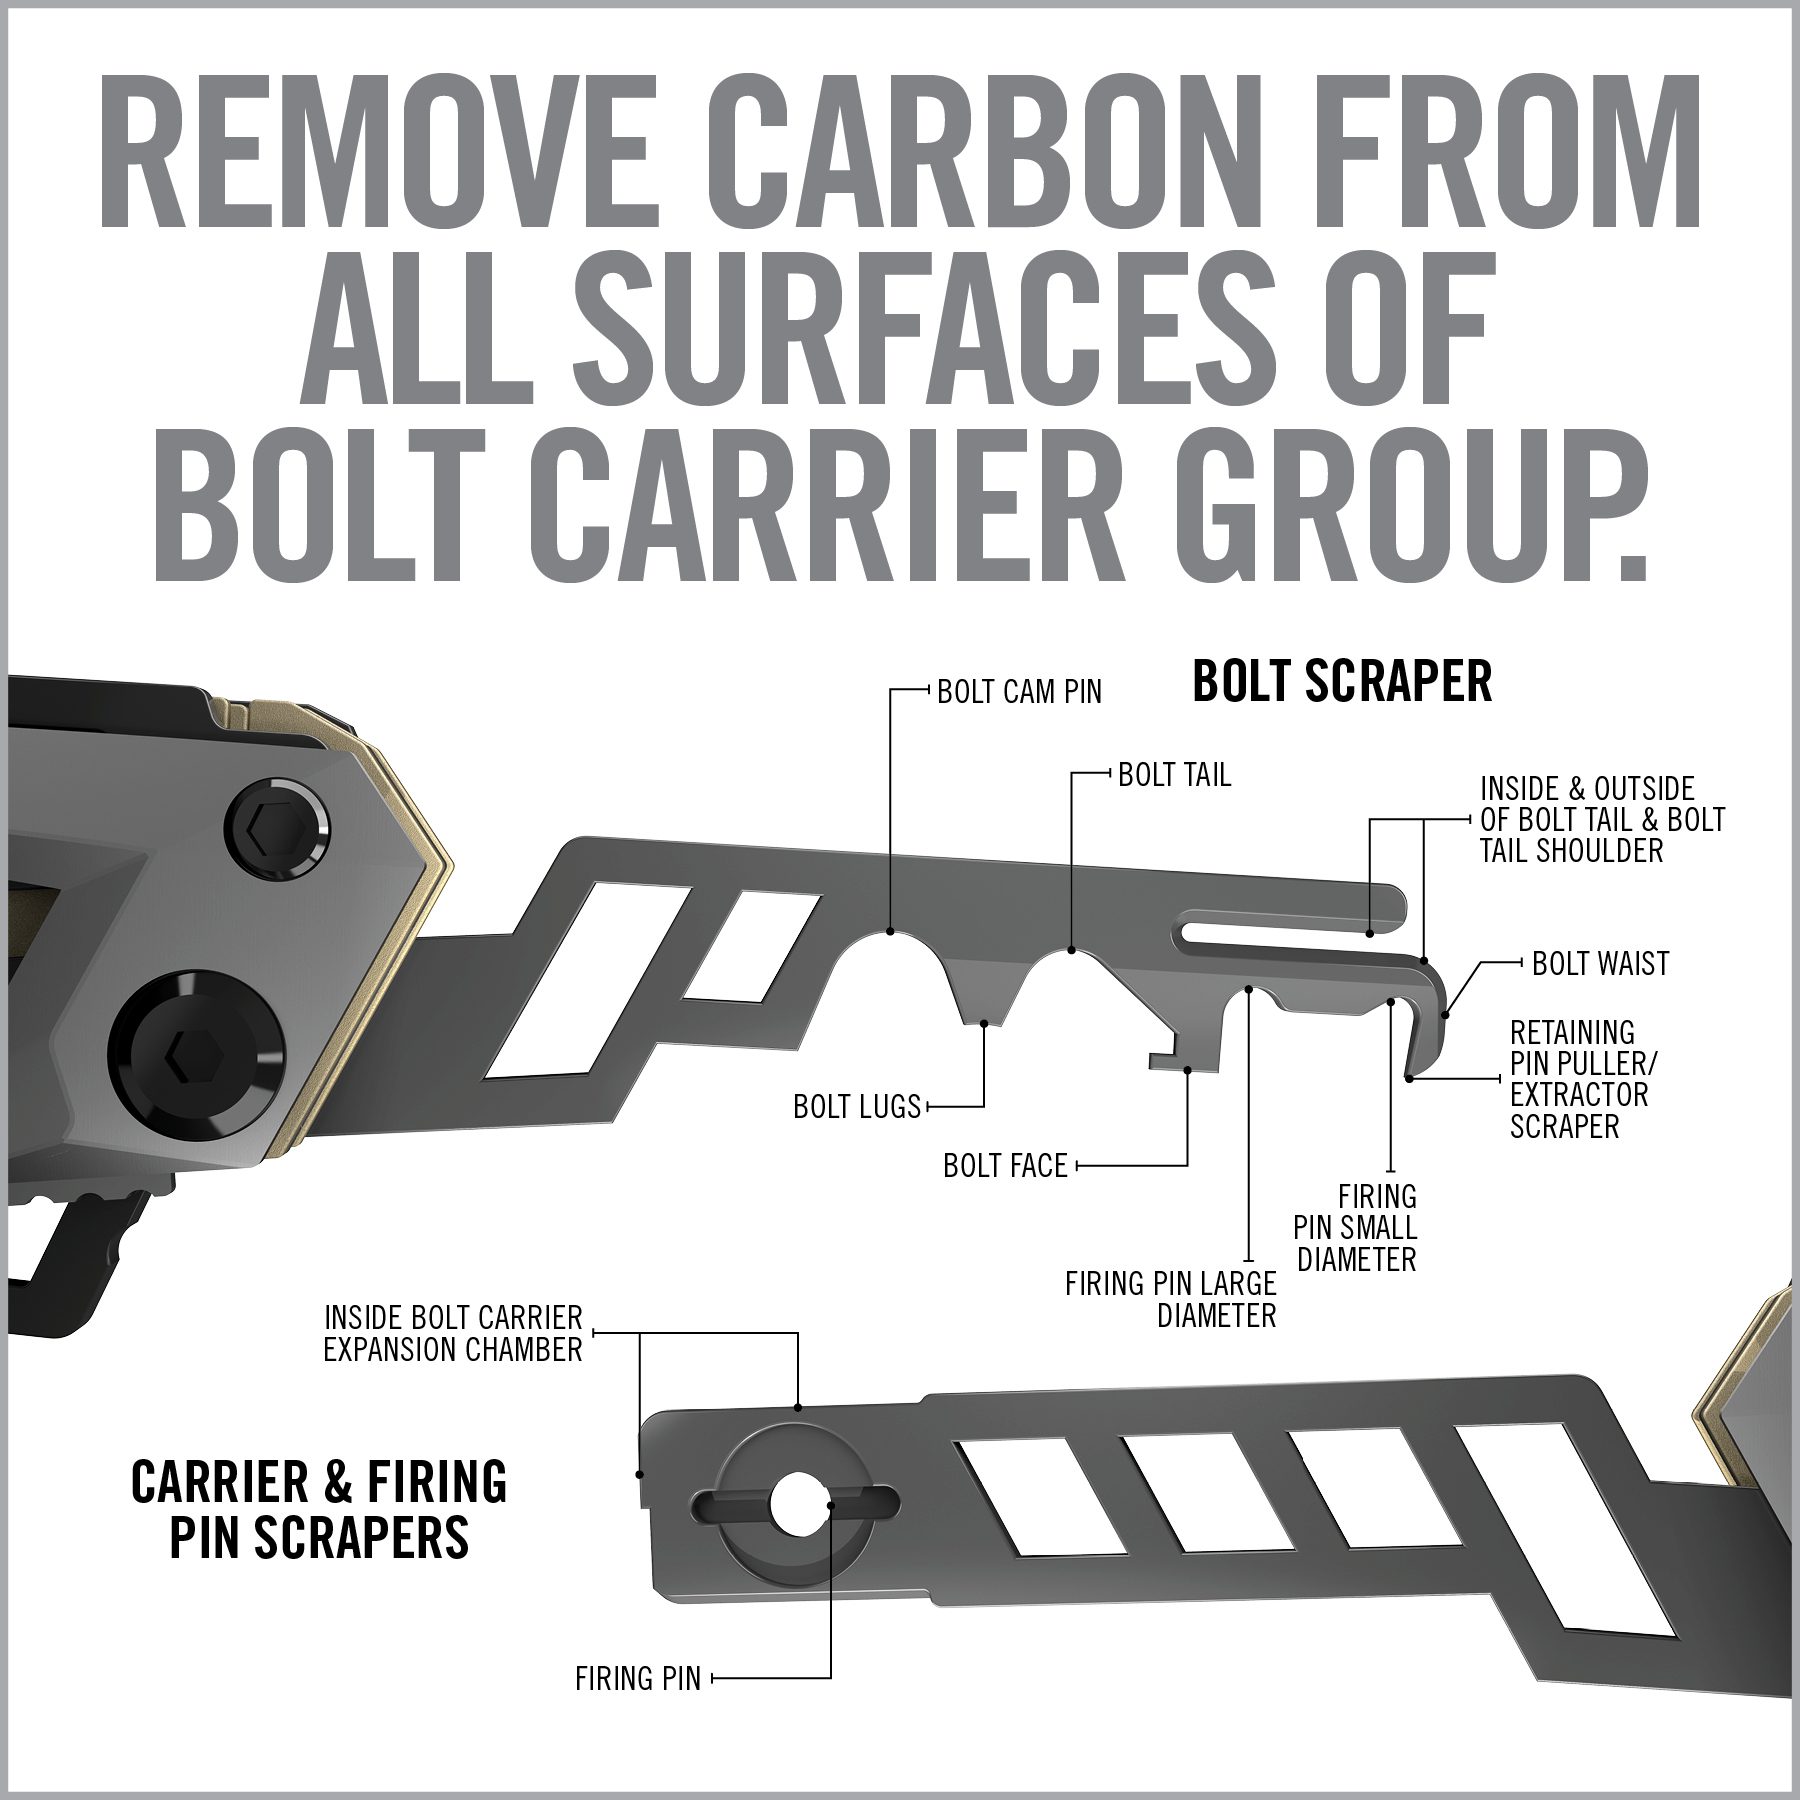 a diagram showing how to remove carbon from all surfaces of bolt carrier group